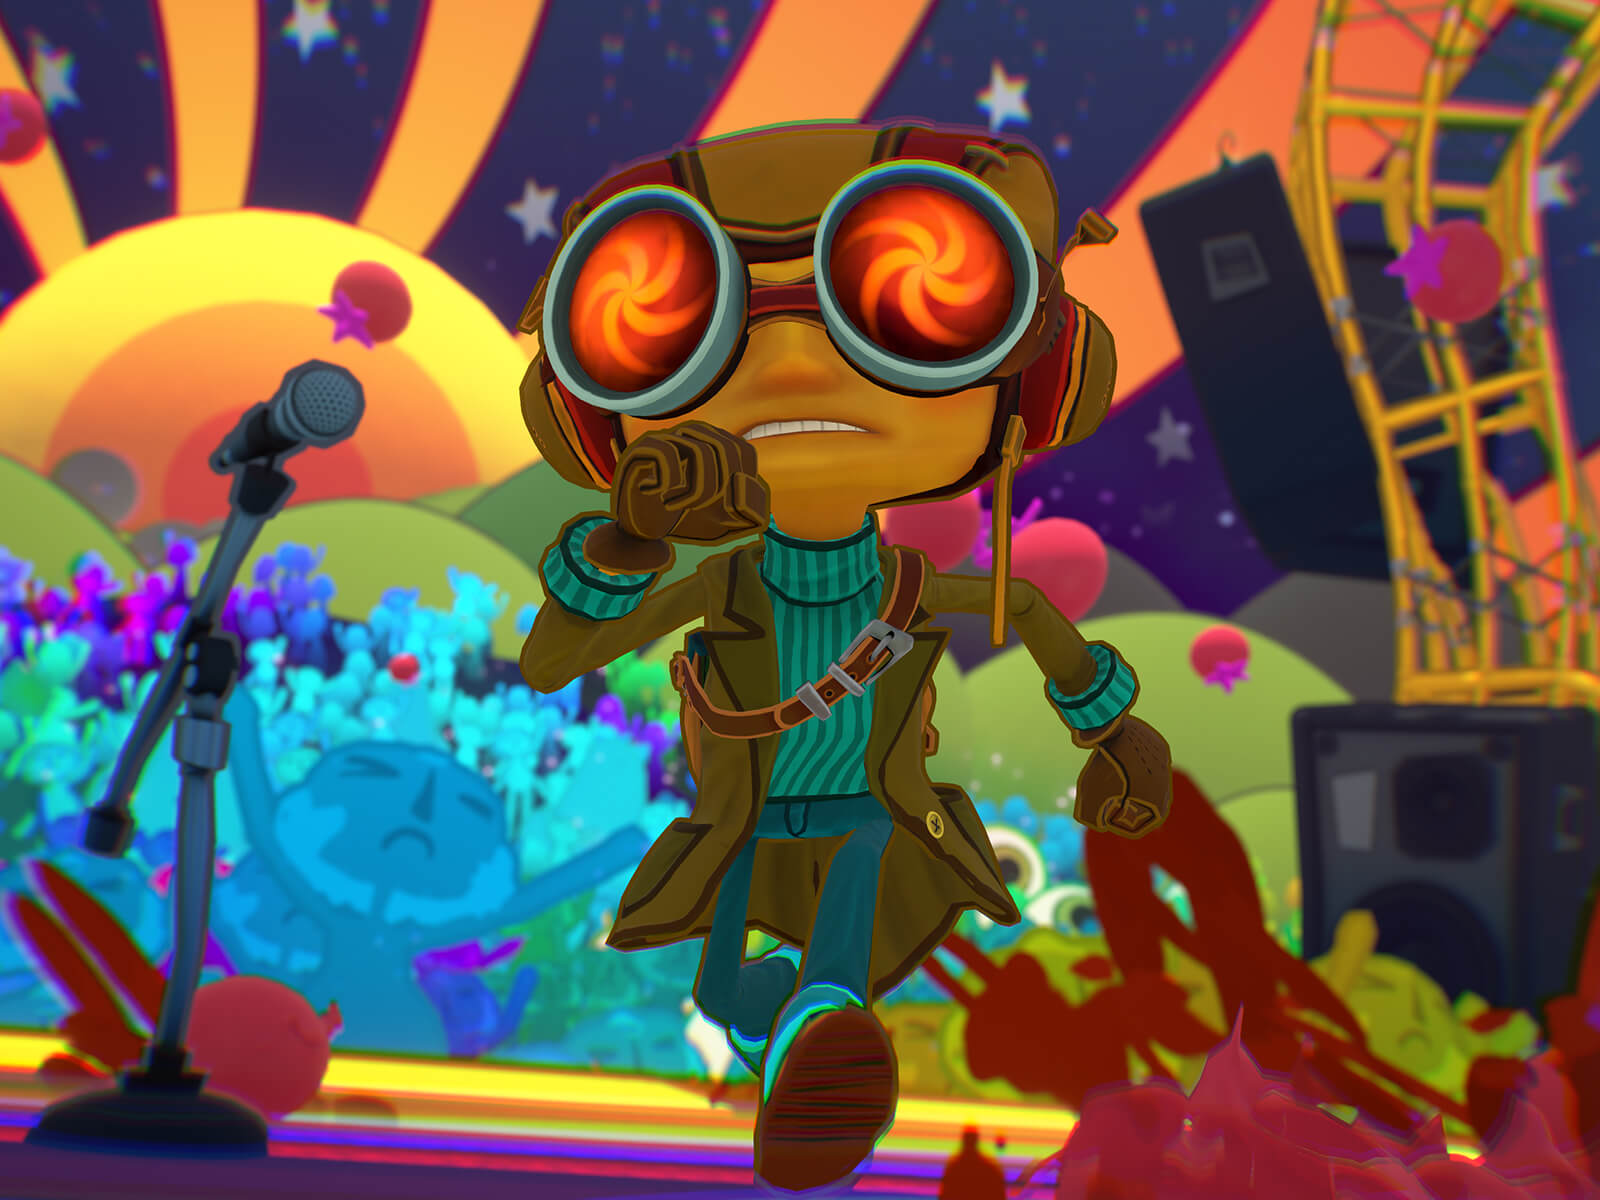 Raz from Psychonauts 2 runs across a colorful concert stage with a crowd behind him.